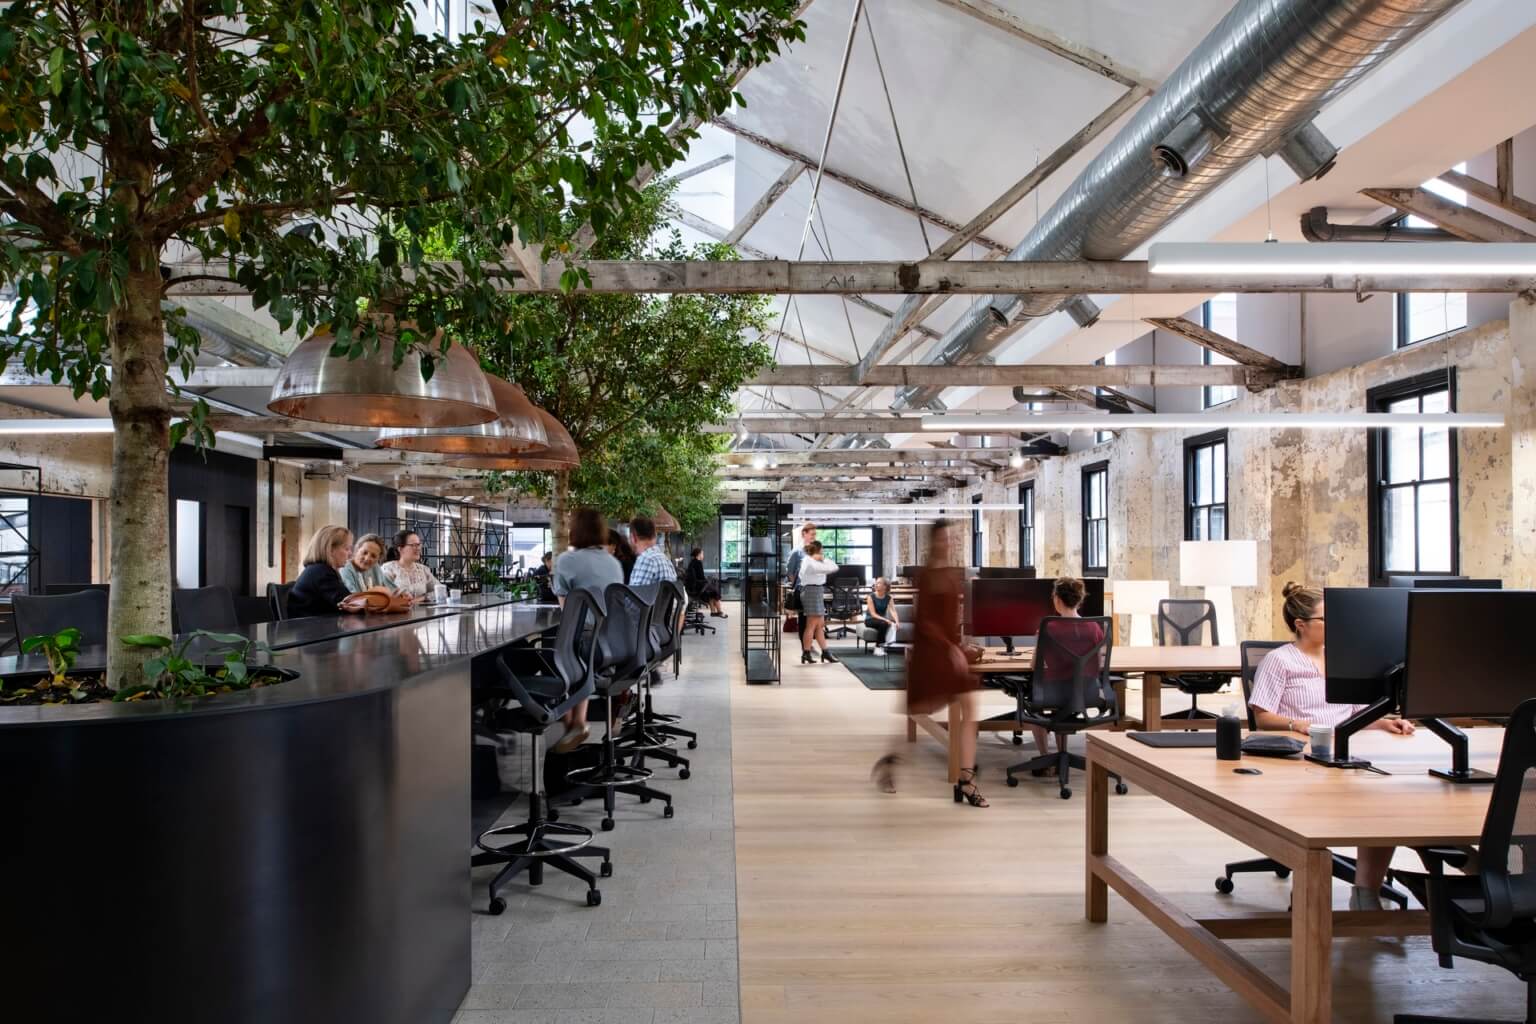 People sharing a desk area in a coworking space